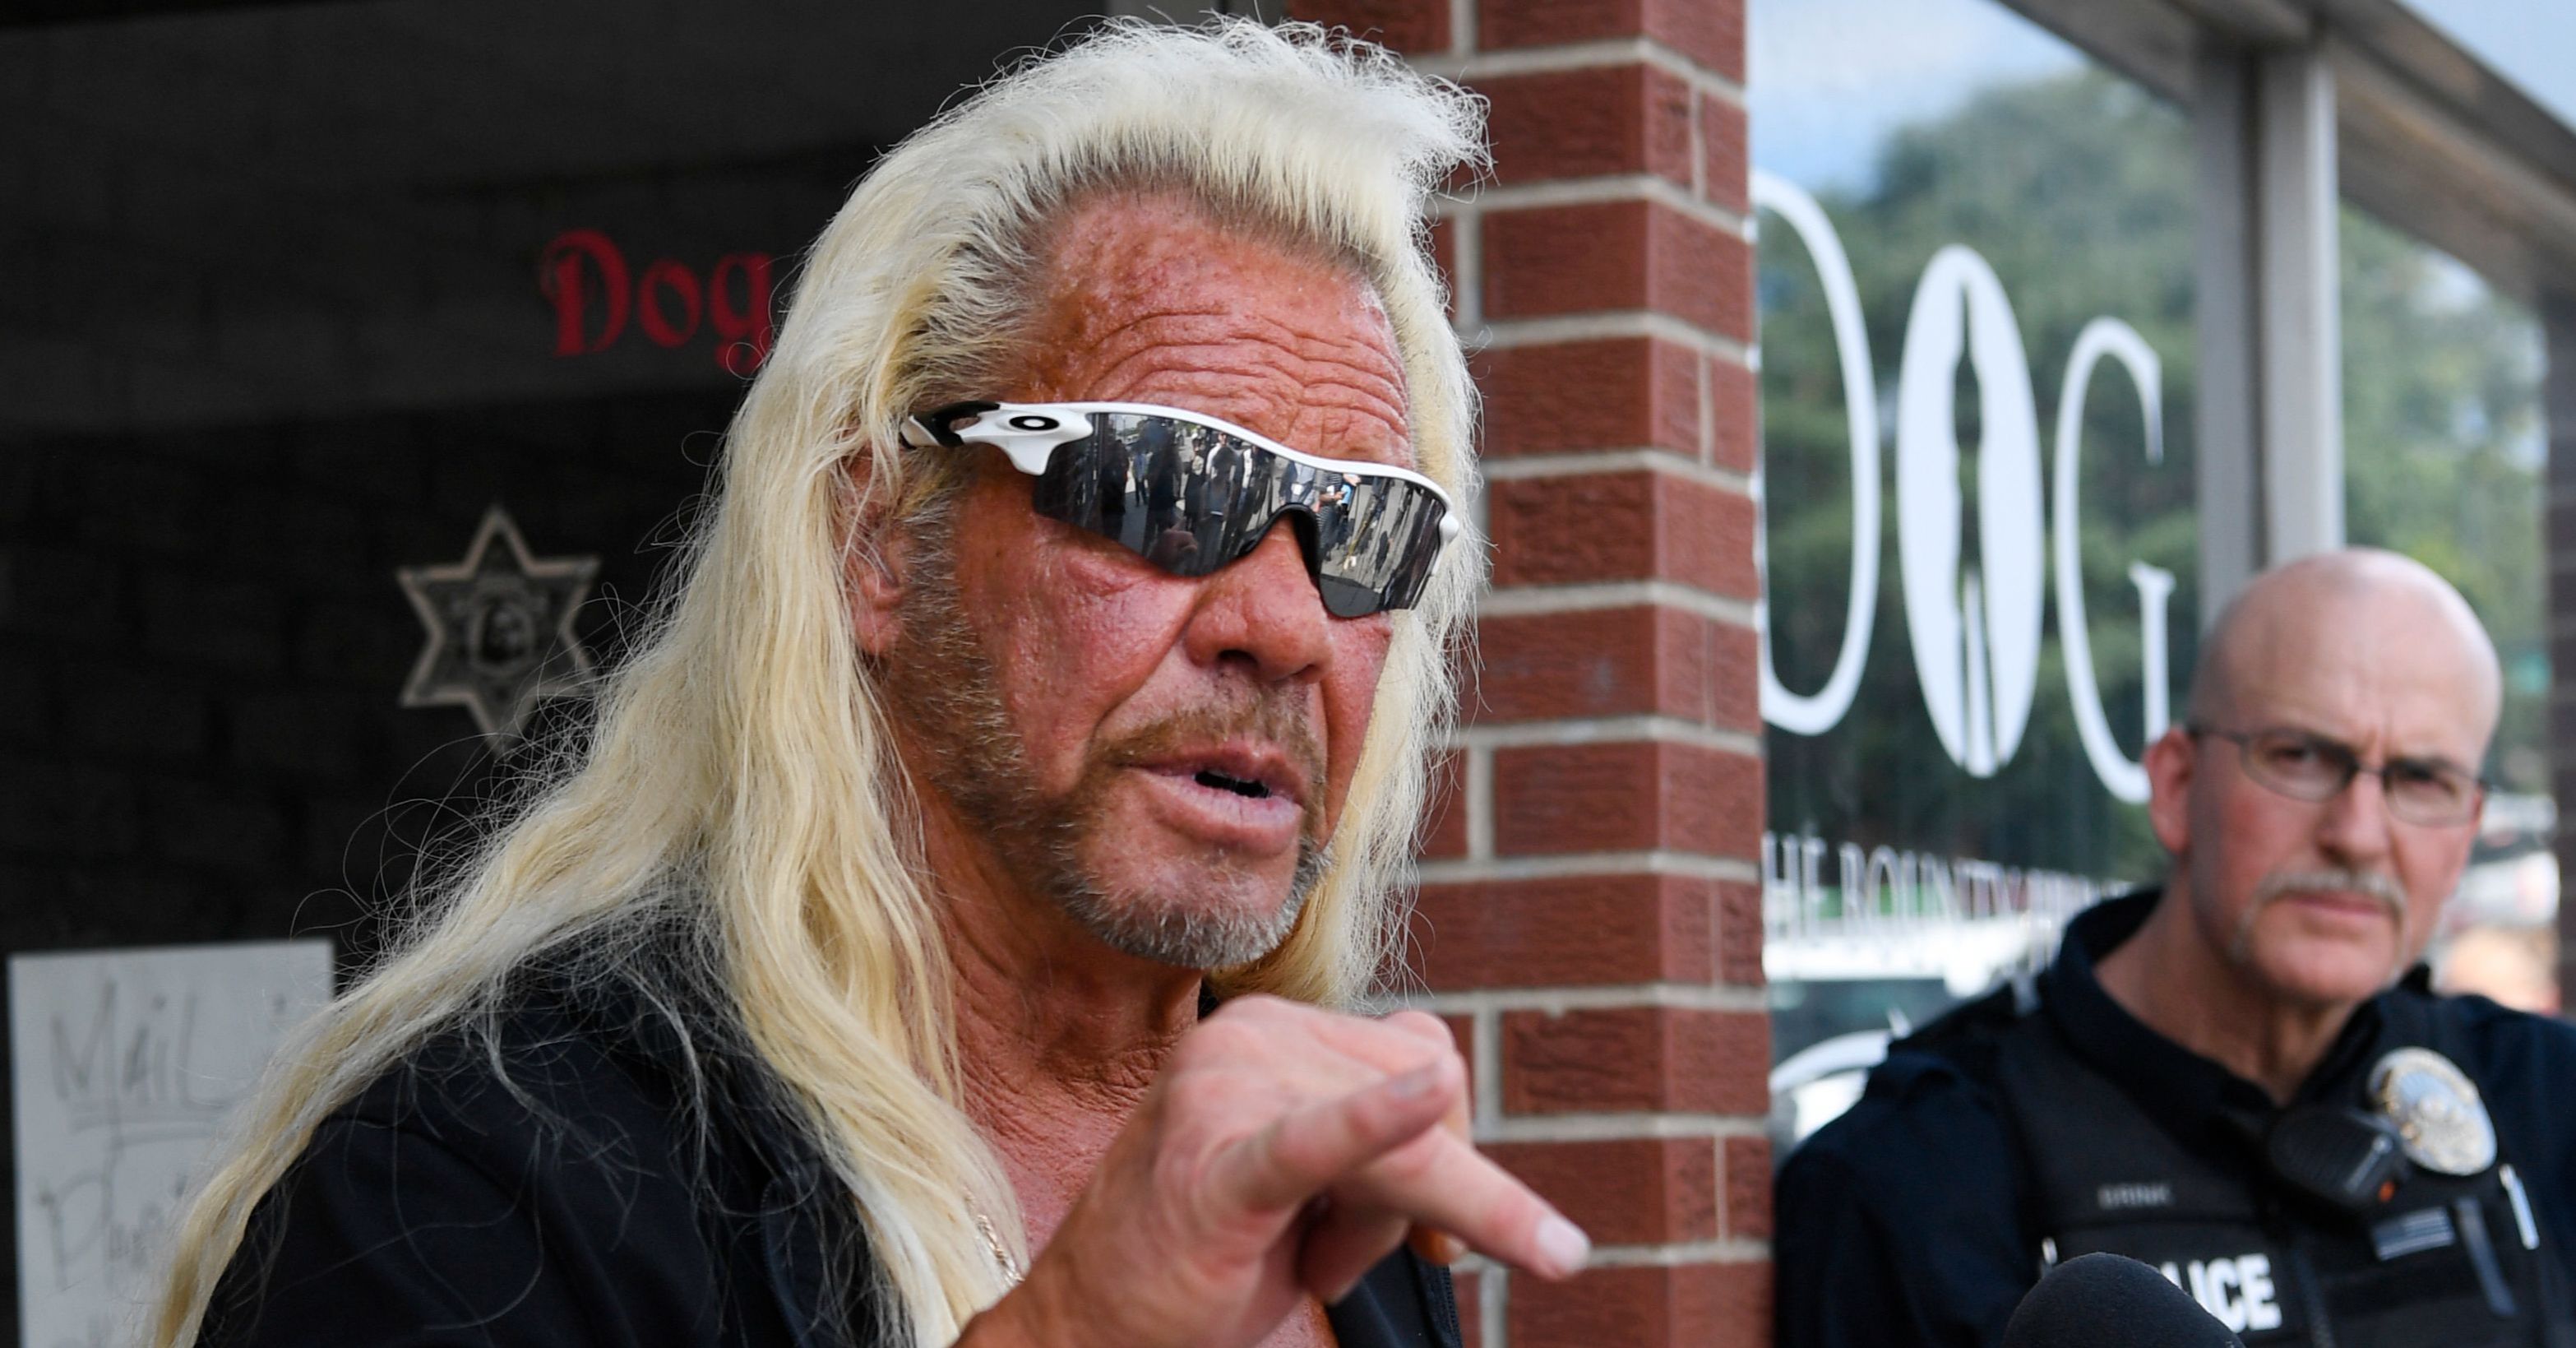 'Dog The Bounty Hunter' Fans Have Strong Reactions After He Apparently Proposed To ...